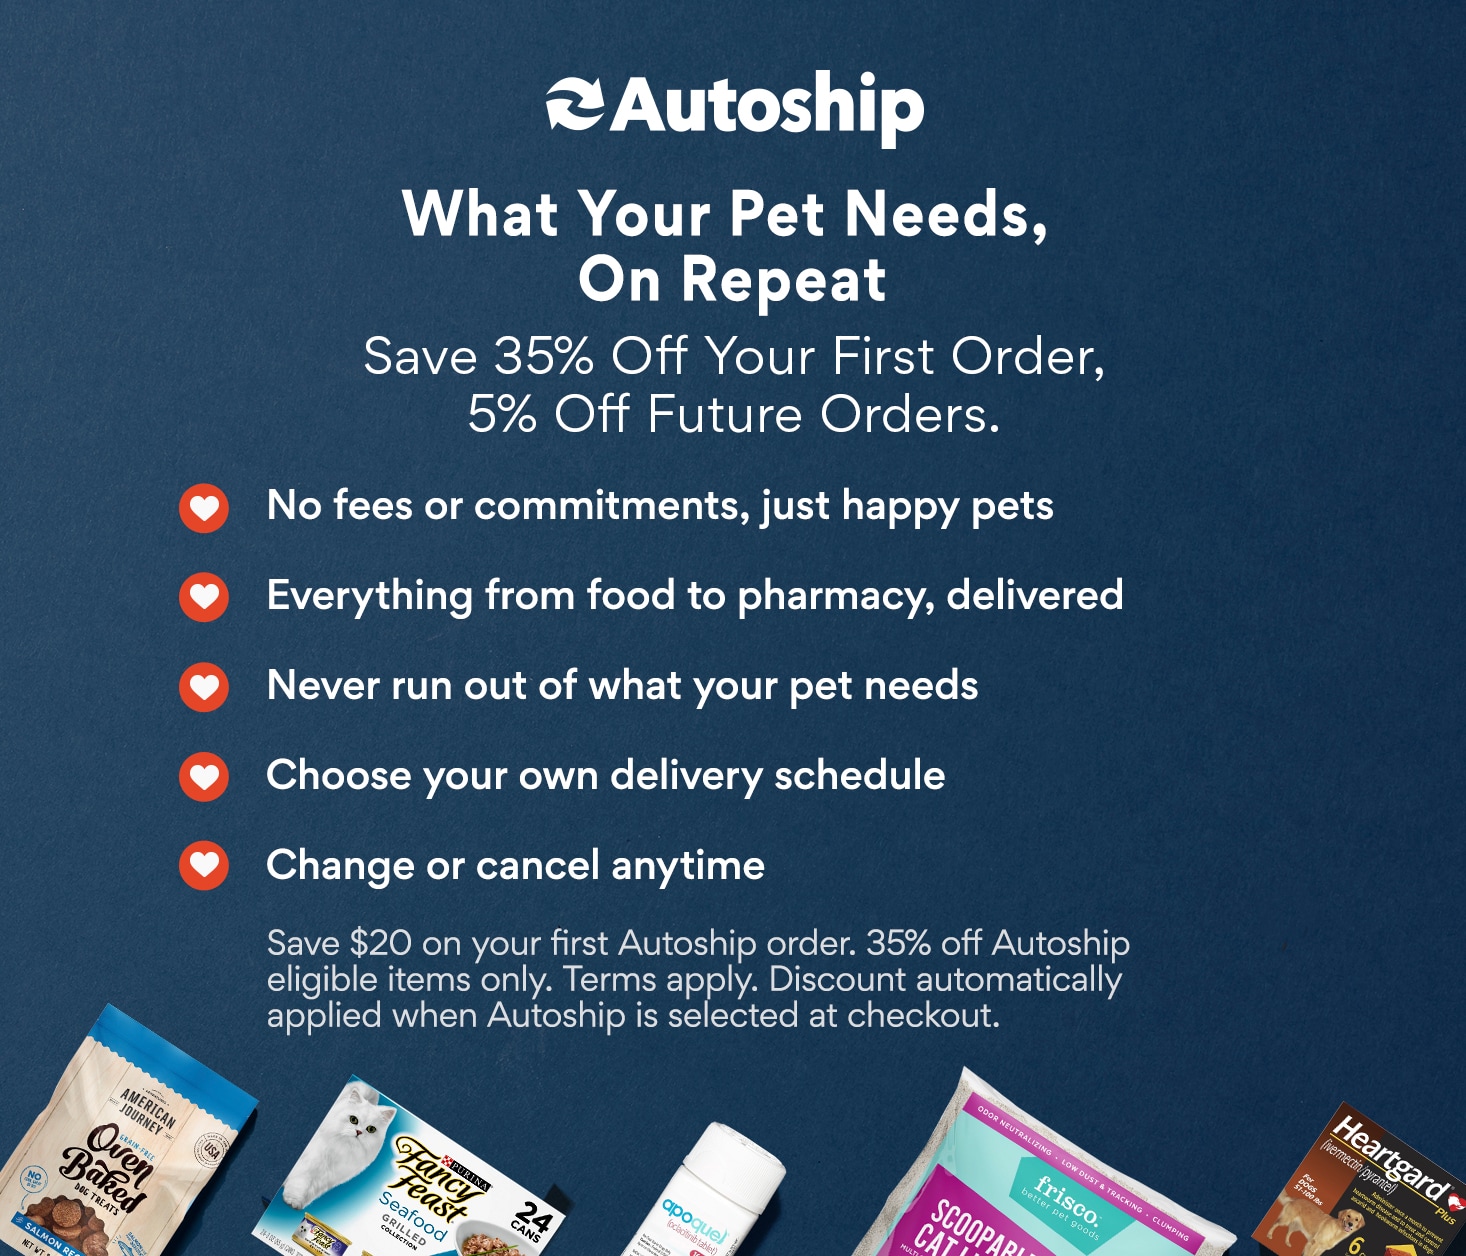 Save 35% on your first Autoship order. Select Autoship at checkout and set your schedule,
          change or cancel at any time, and enjoy extra savings. Maximum discount of $20 with 35% OFF promotion. For Autoship-eligible items only.
          Discount automatically applied when Autoship is selected at checkout. No coupons necessary.